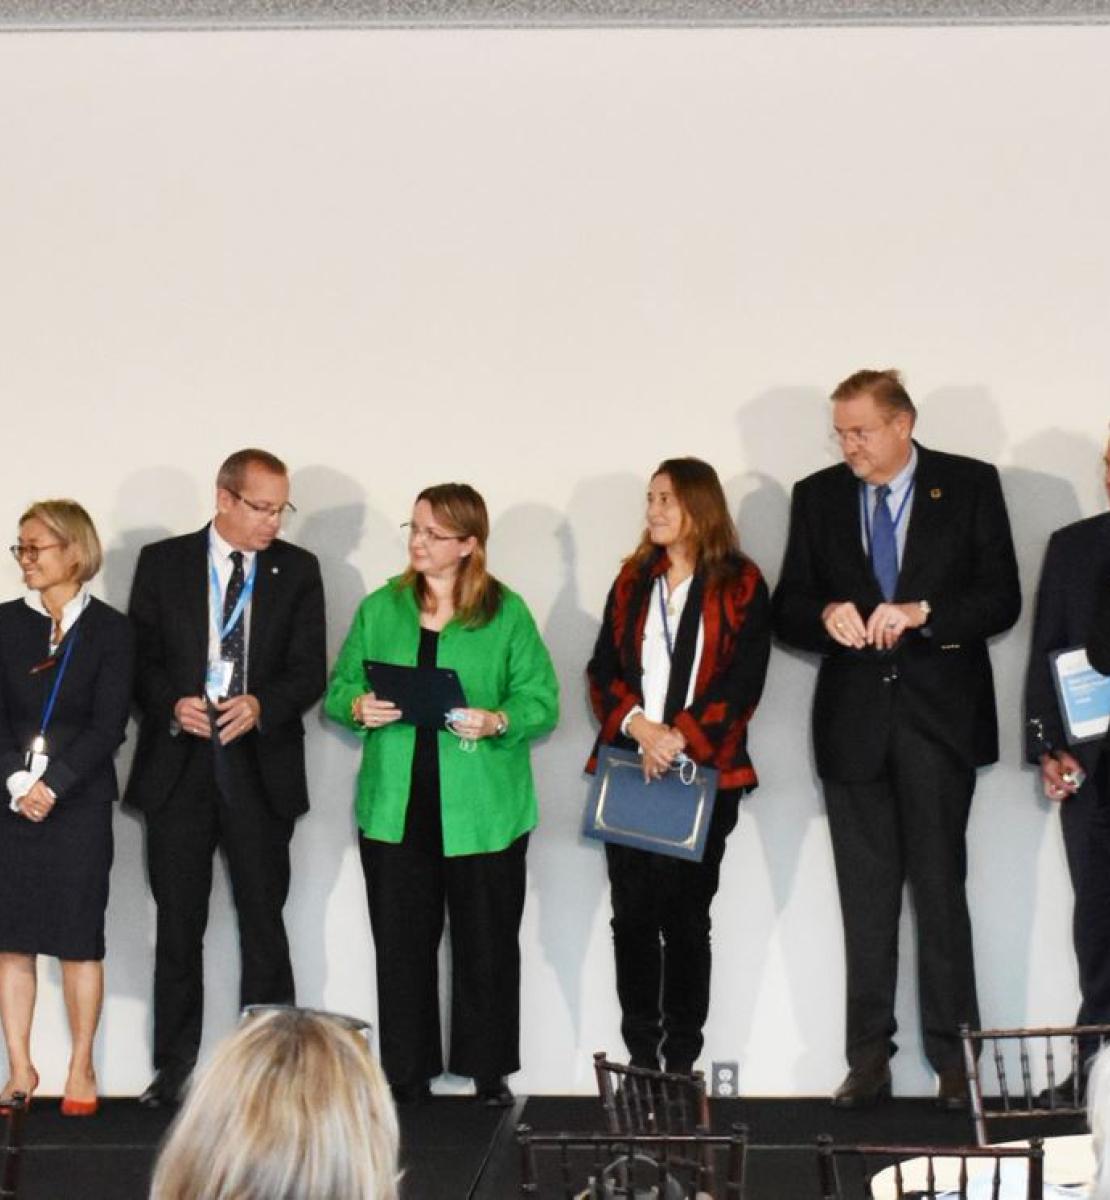 A group of sixteen people in business attire, standing next to each other, clapping and congratulating one another, on a stage during the UN Team Annual Results Reports Awards ceremony.